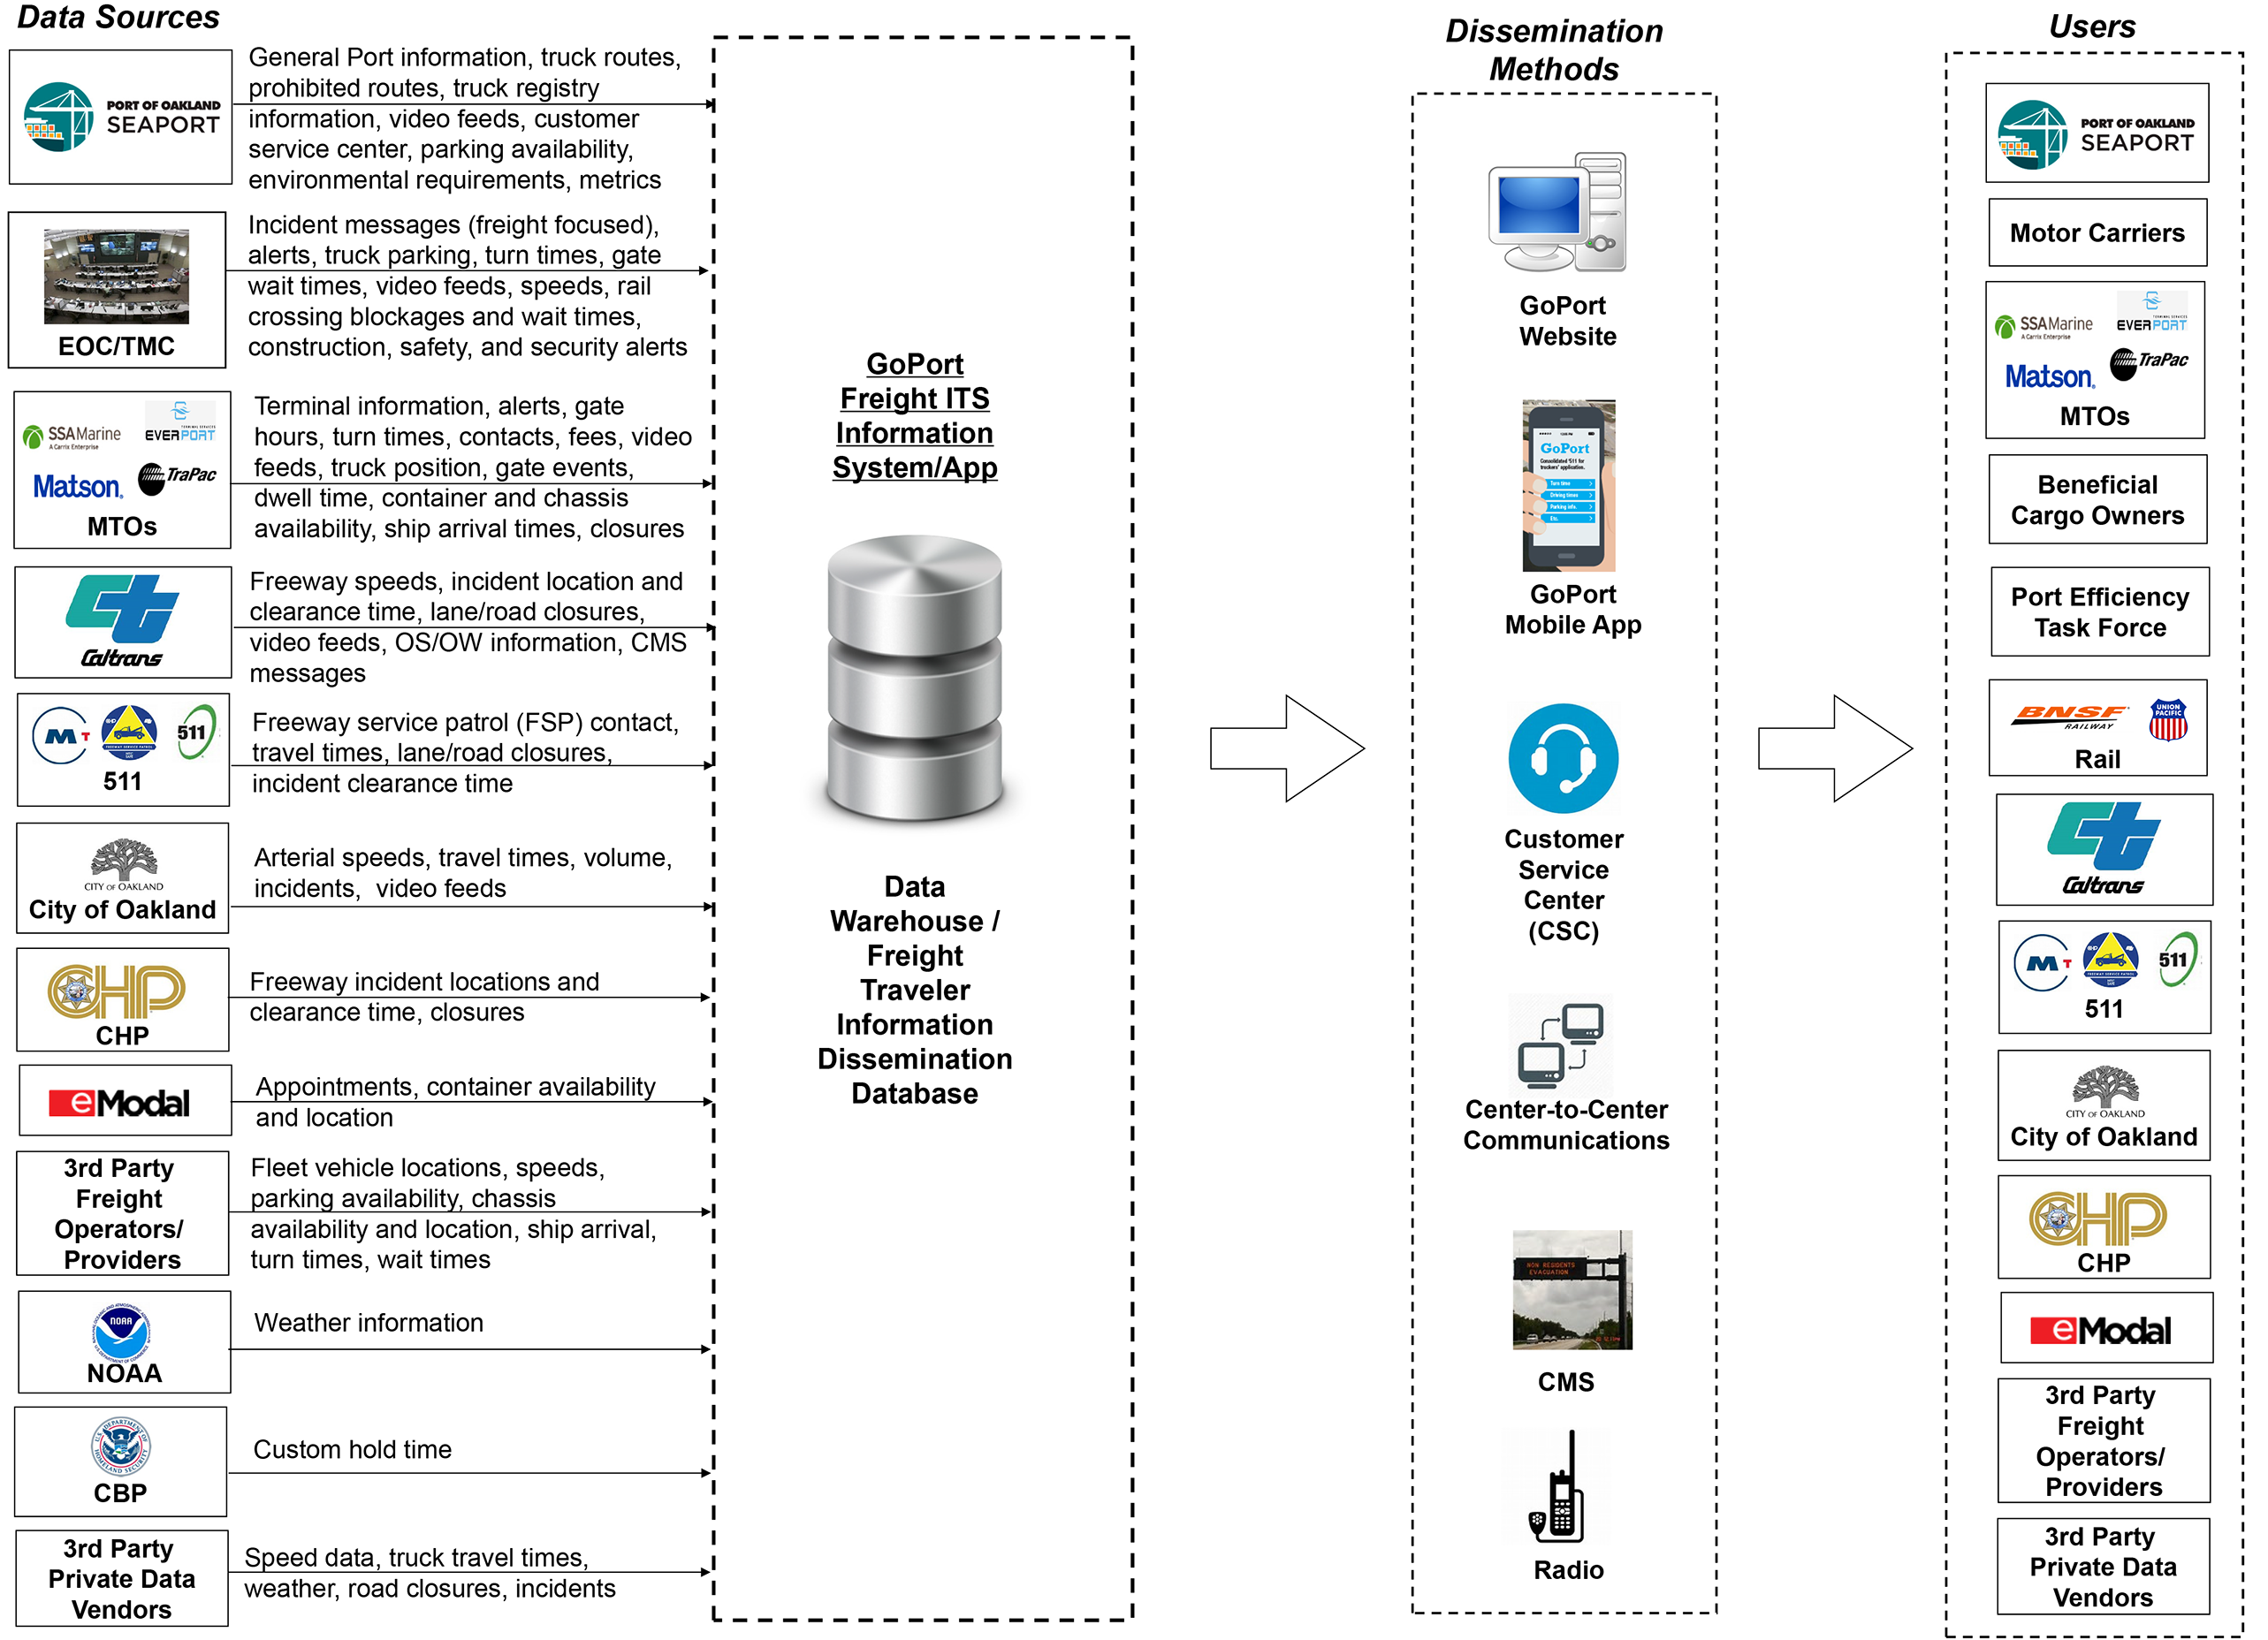 Figure 6: GoPort Freight ITS Informaiton and ATMS Data Integration Approach